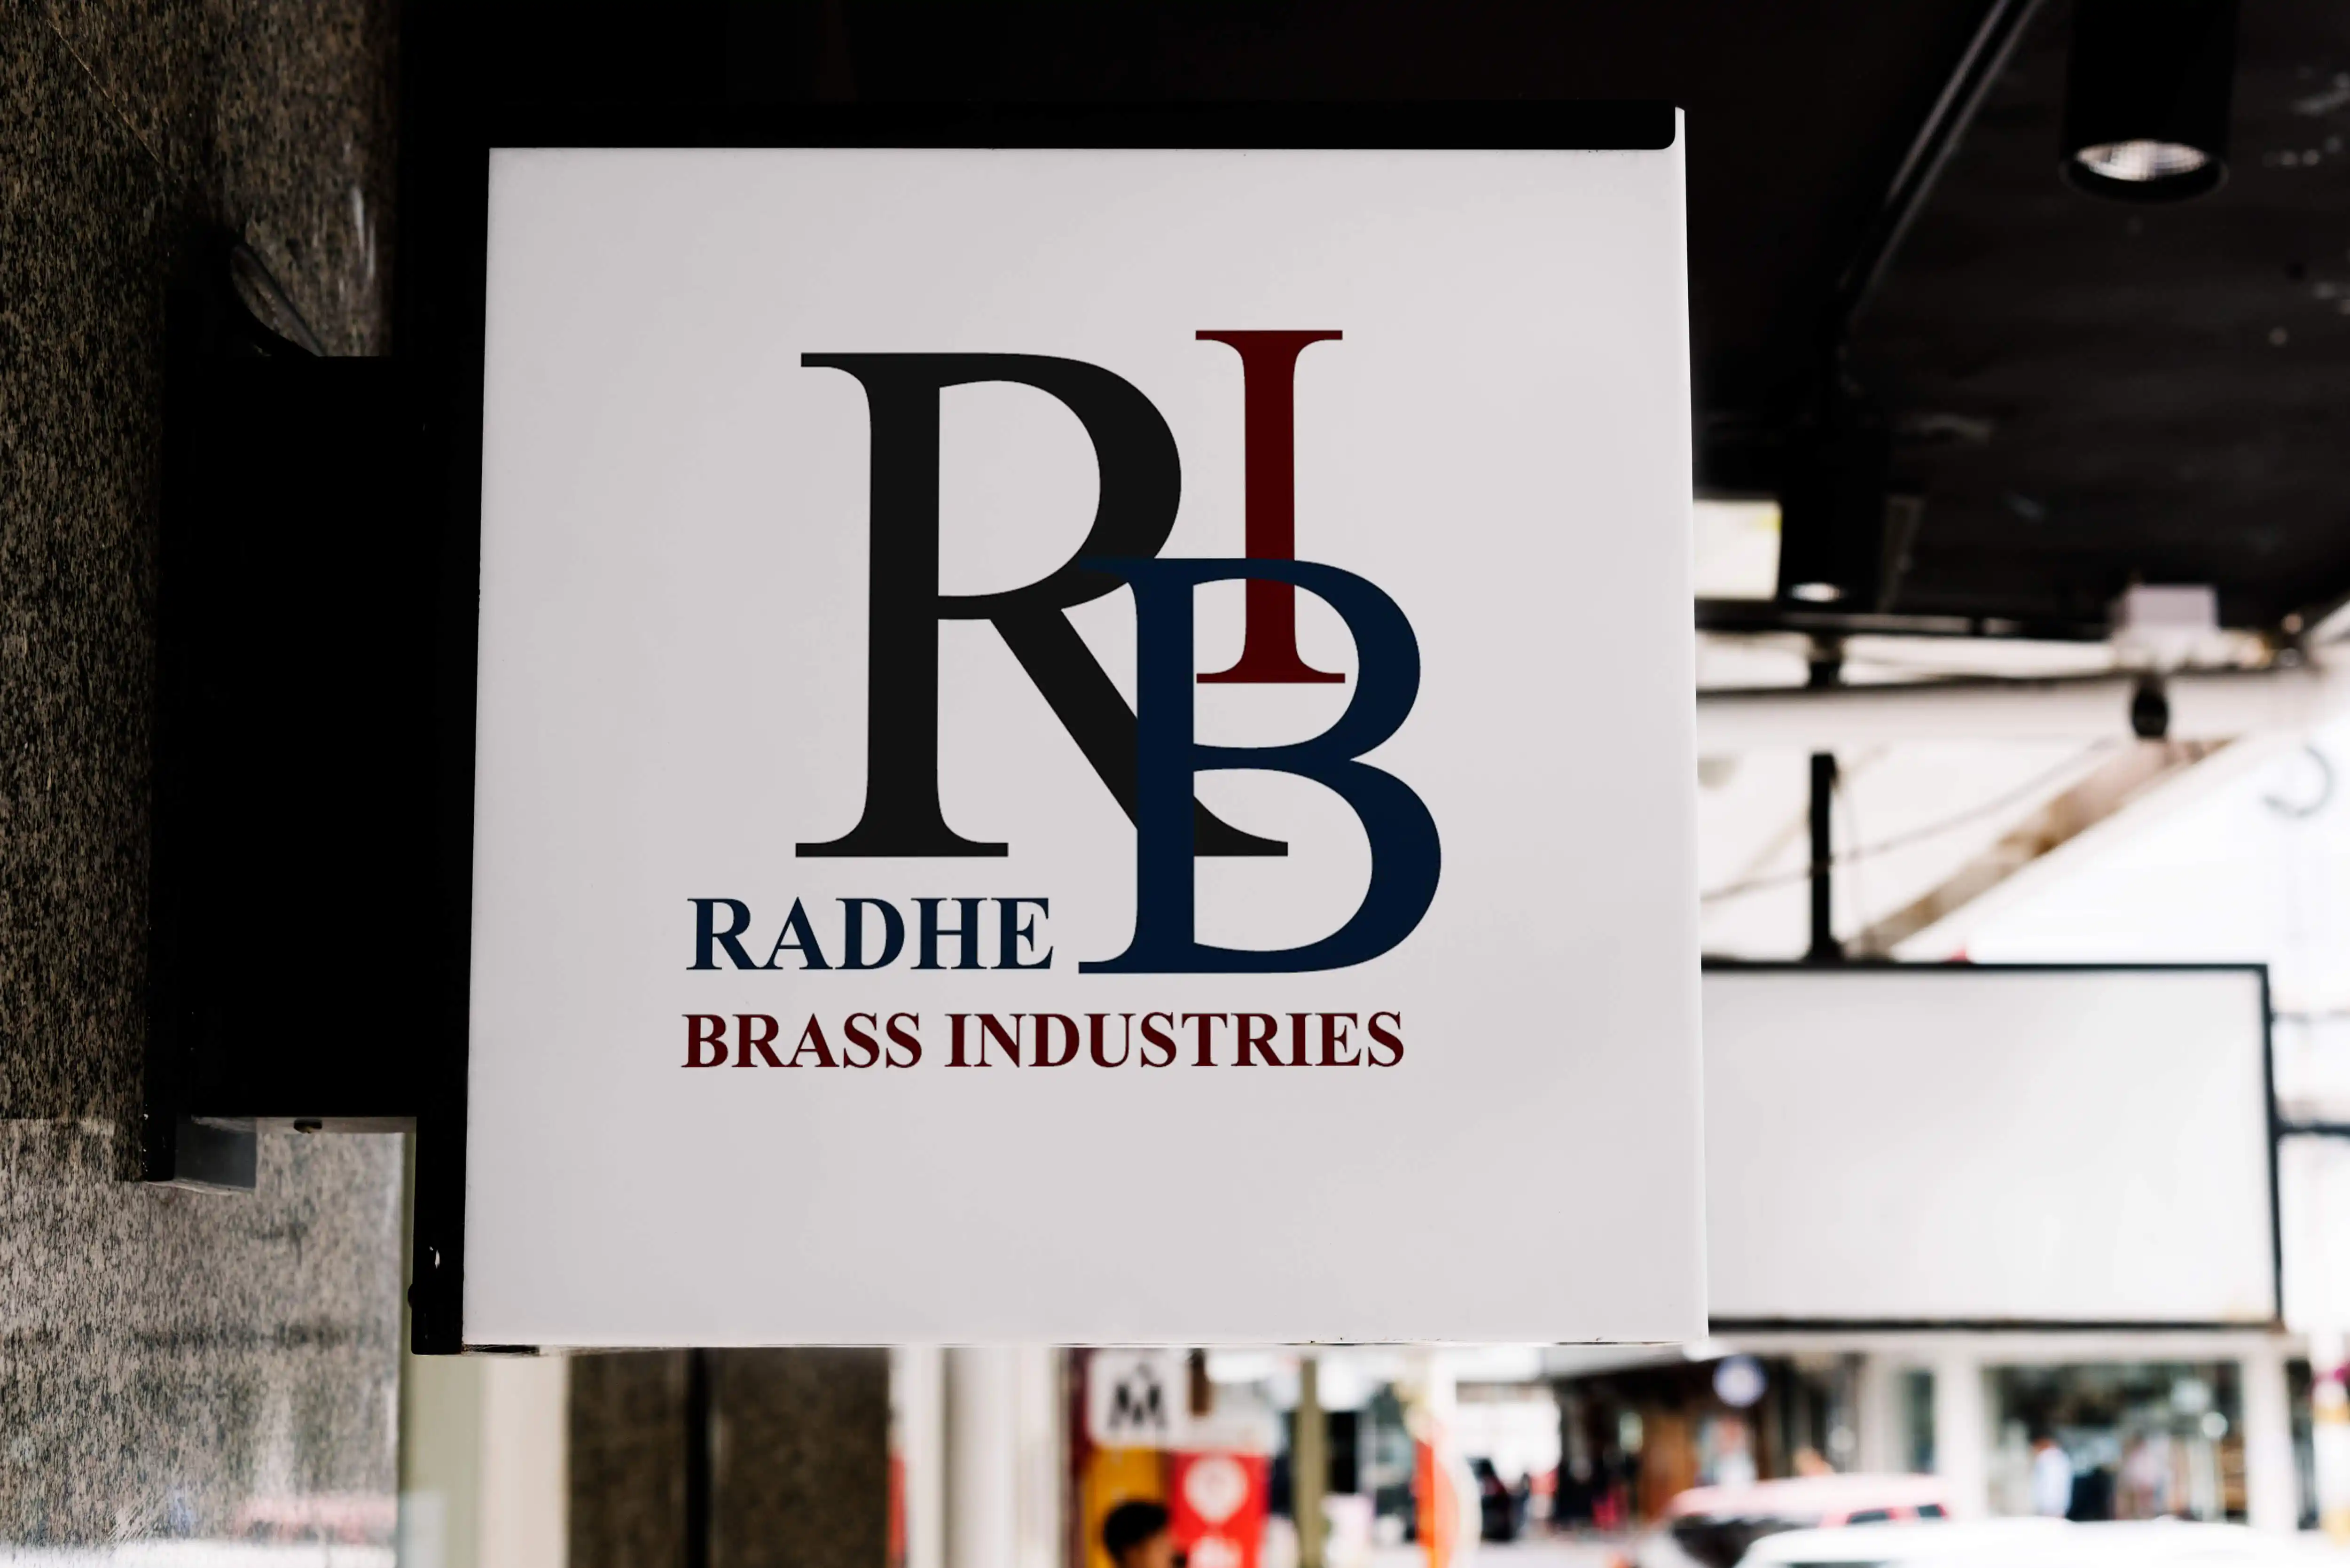 Radhe Brass Industries operates as a subsidiary within the Shivansh Enterprise